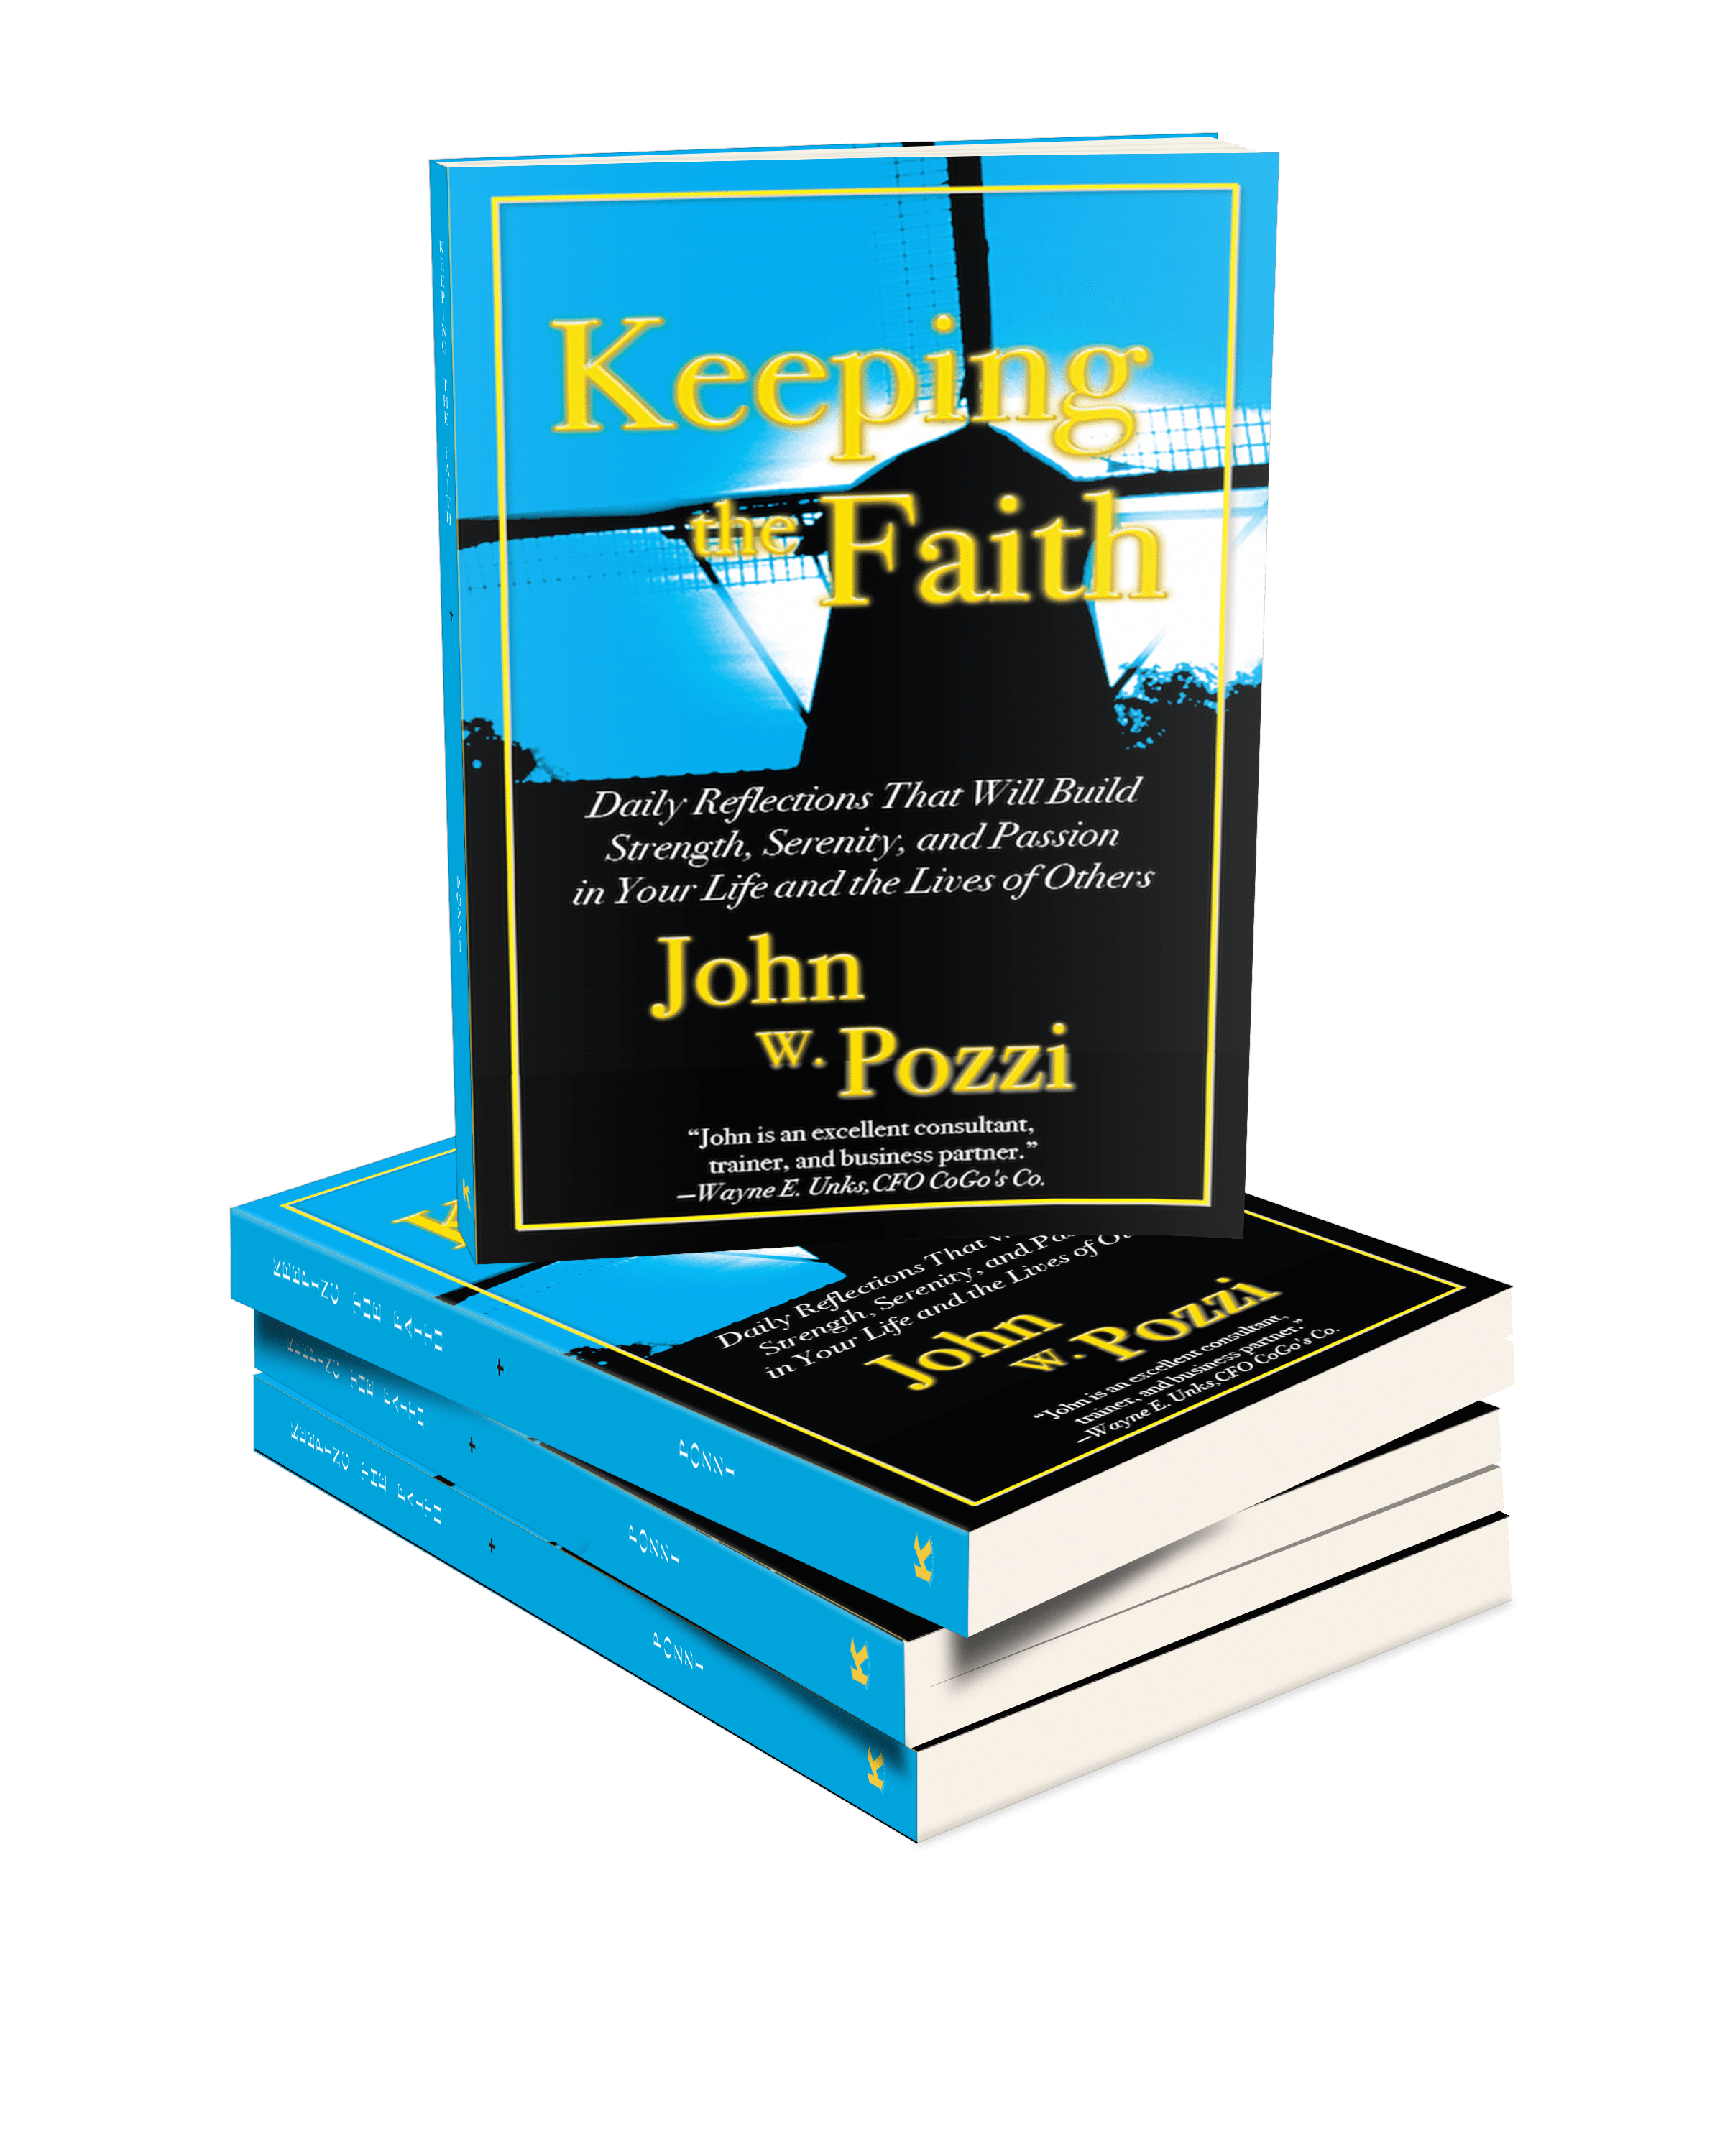 Keeping the Faith: Daily Reflections That Will Build Strength, Serenity, and Passion in Your Life and the Lives of Others by John W. Pozzi